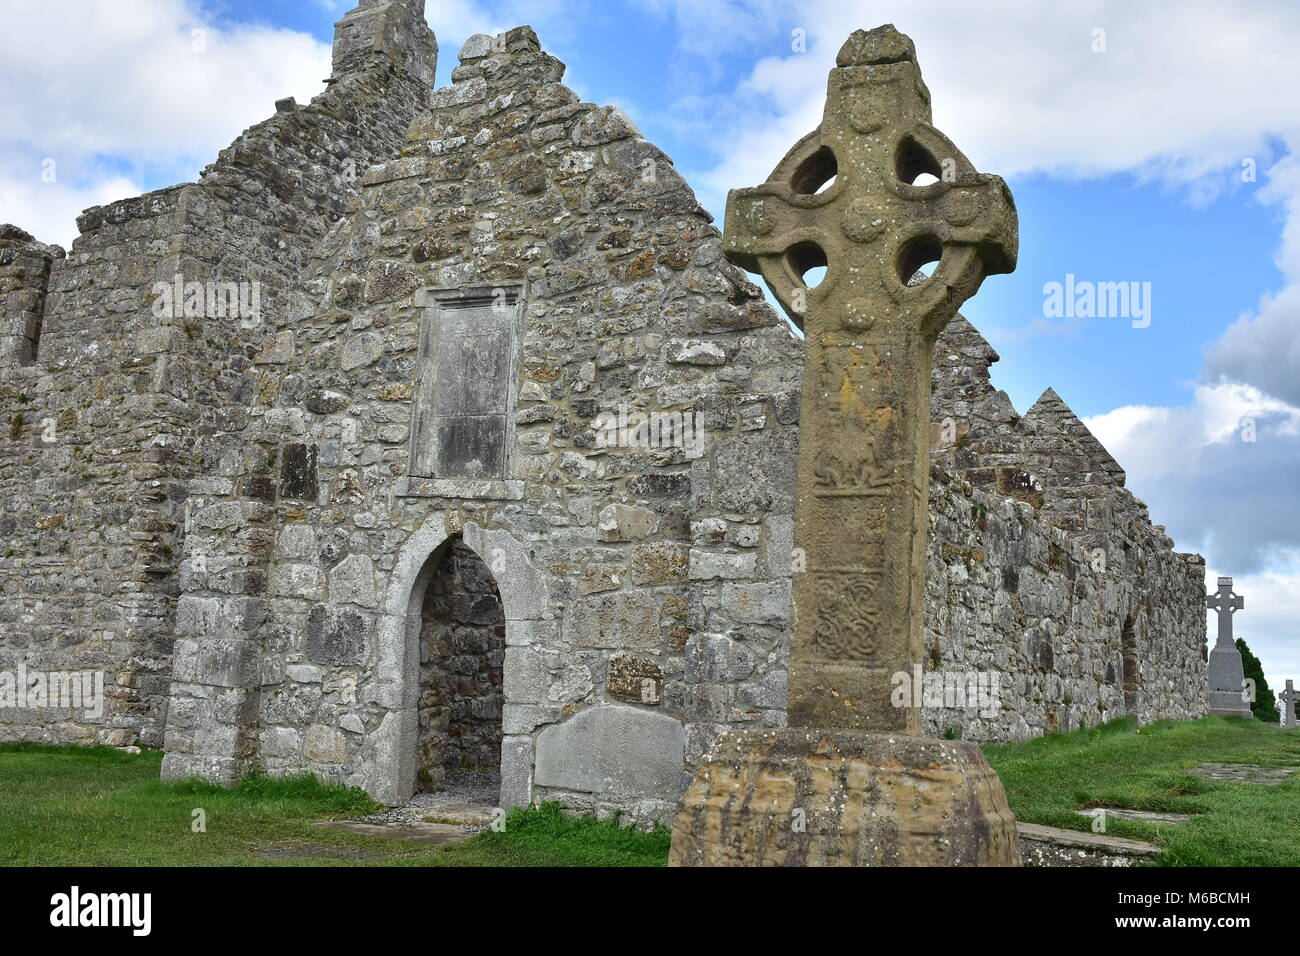 Replica of original 9th century sandstone high cross called South Cross on grounds of monastery of Clonmacnoise in Ireland. Stock Photo